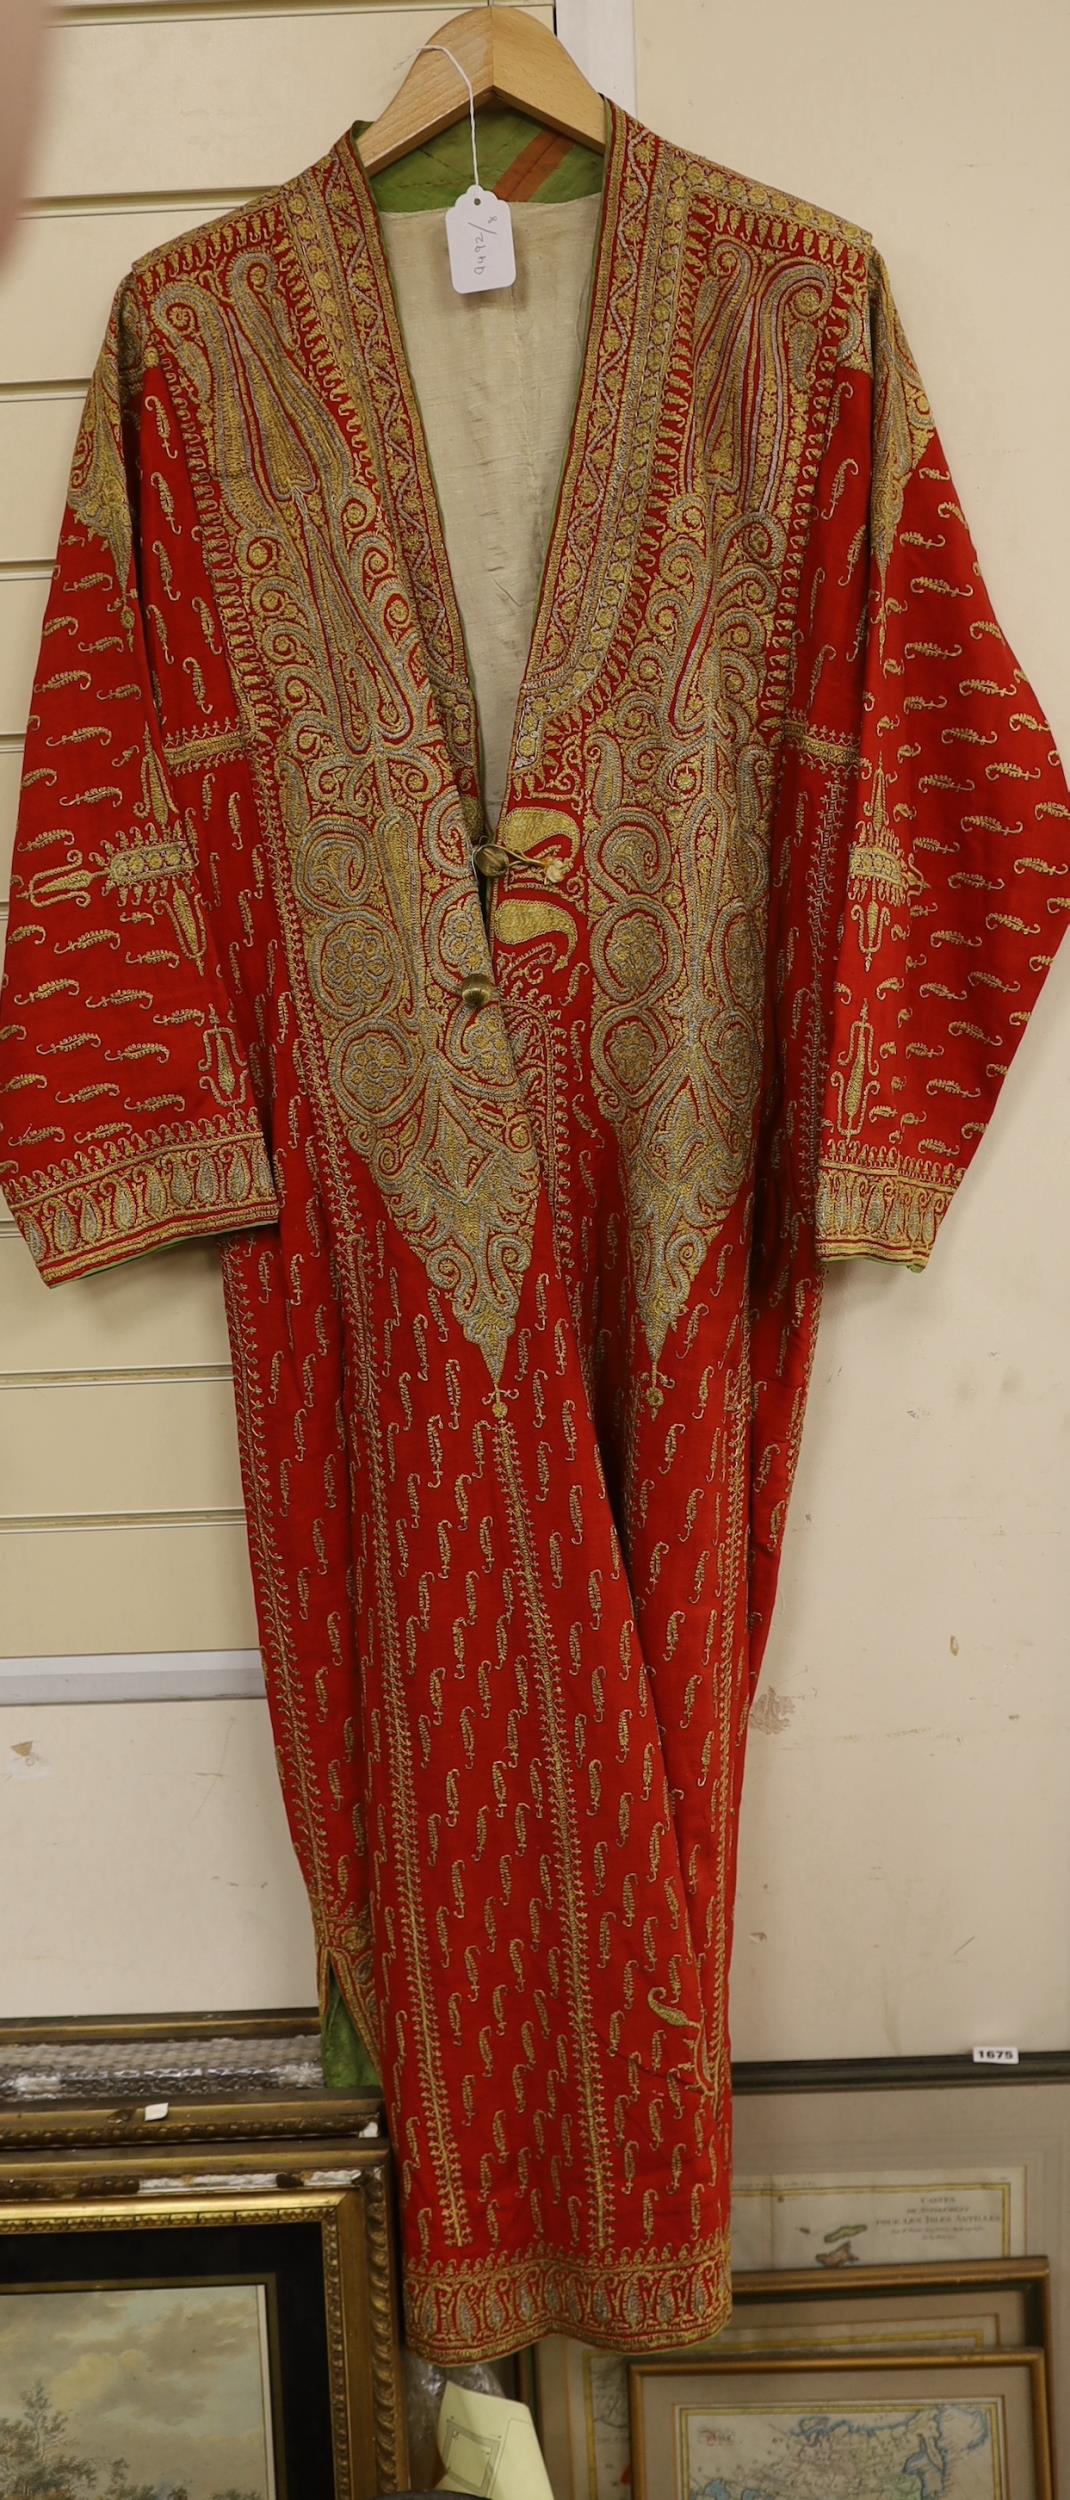 A 19th century fine wool coat, embroidered with gold and silver coloured metal threads in an all